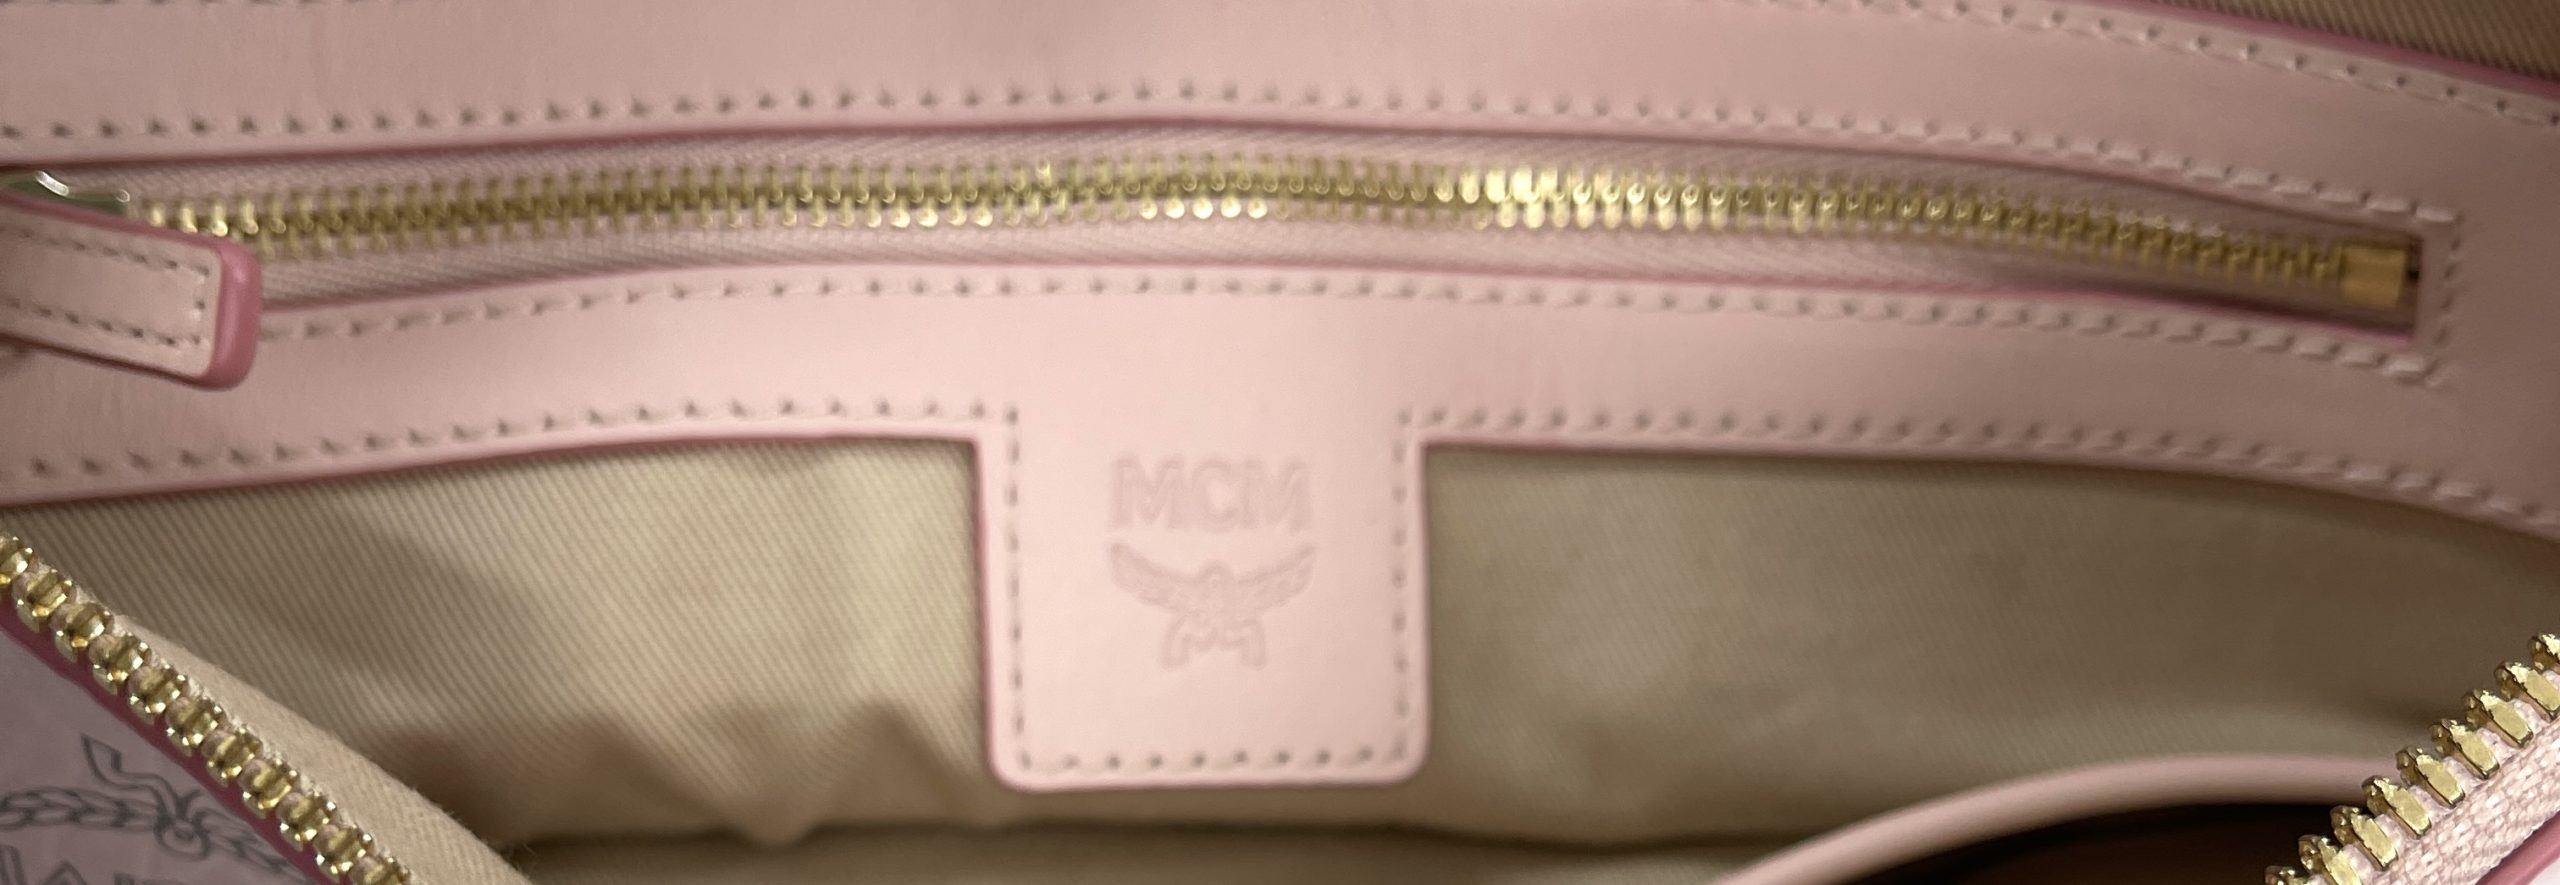 MCM, Bags, Authentic Mcm Bag With Serial Number